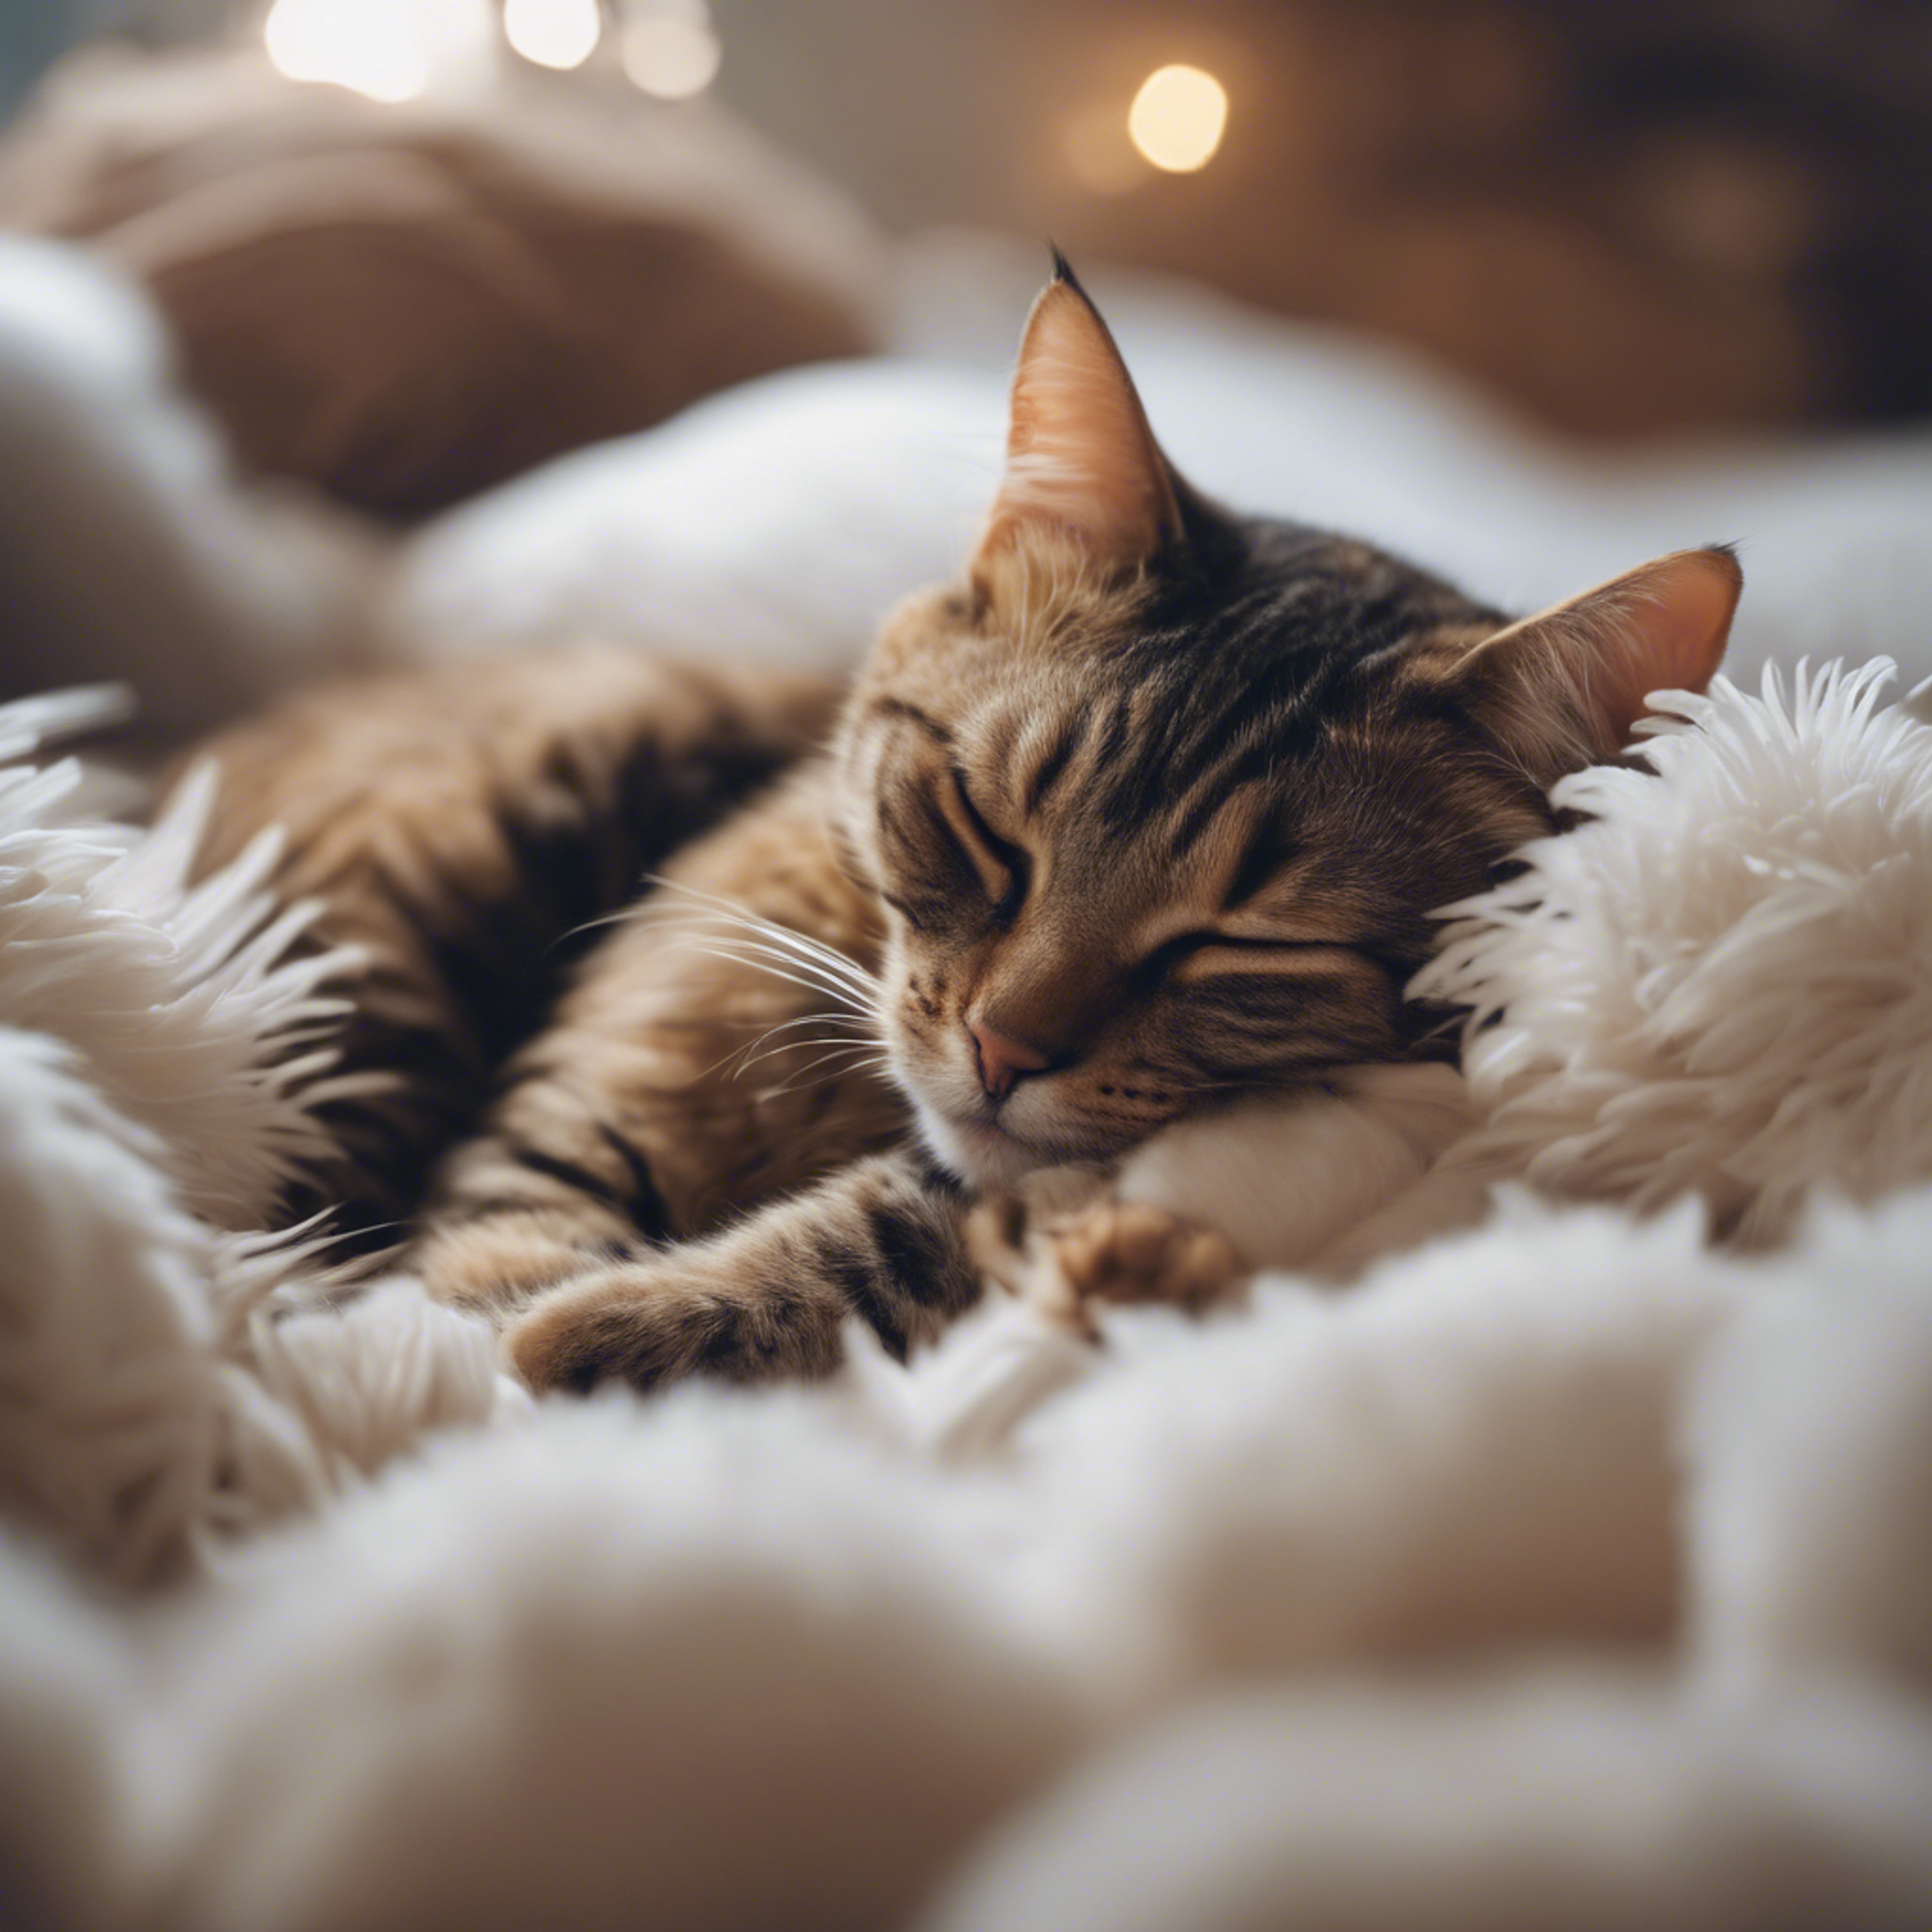 A cat sleeping soundly, completely submerged in a sea of cozy, fluffy pillows. טפט[9e78fe4df88a4e90bb06]